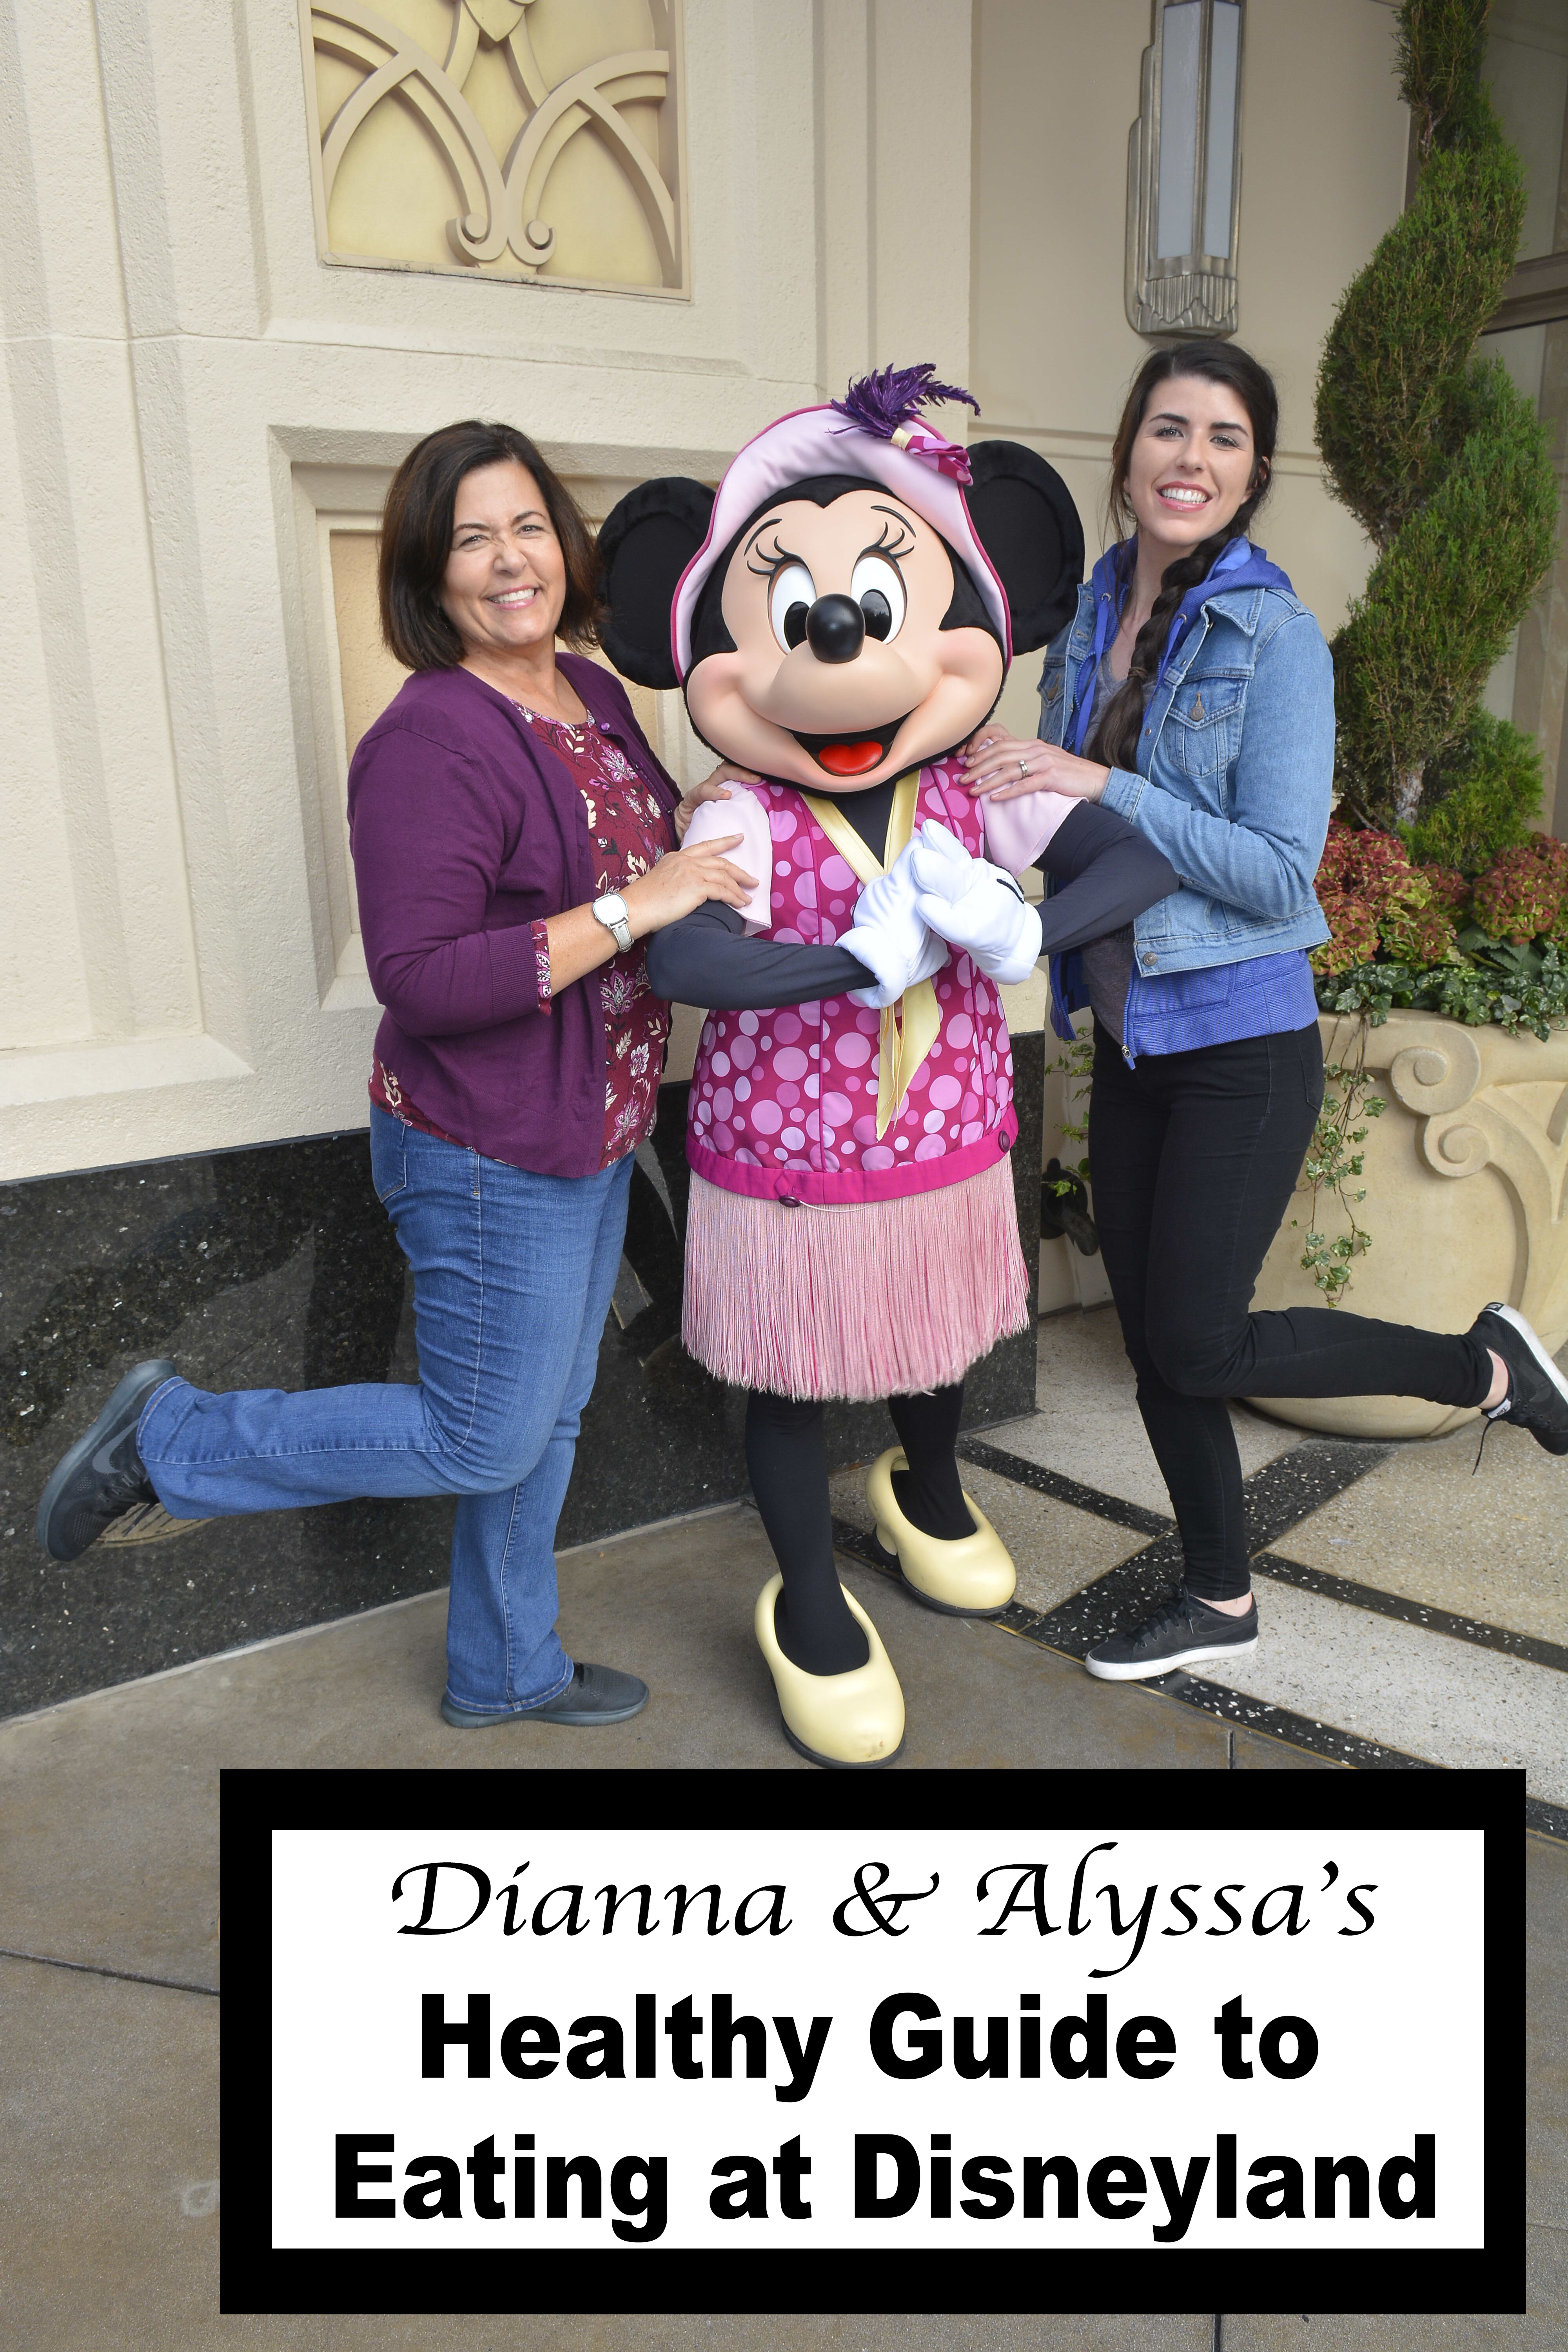 Dianna and Alyssa w/ Minnie Mouse--Healthy guide to eating at Disneyland